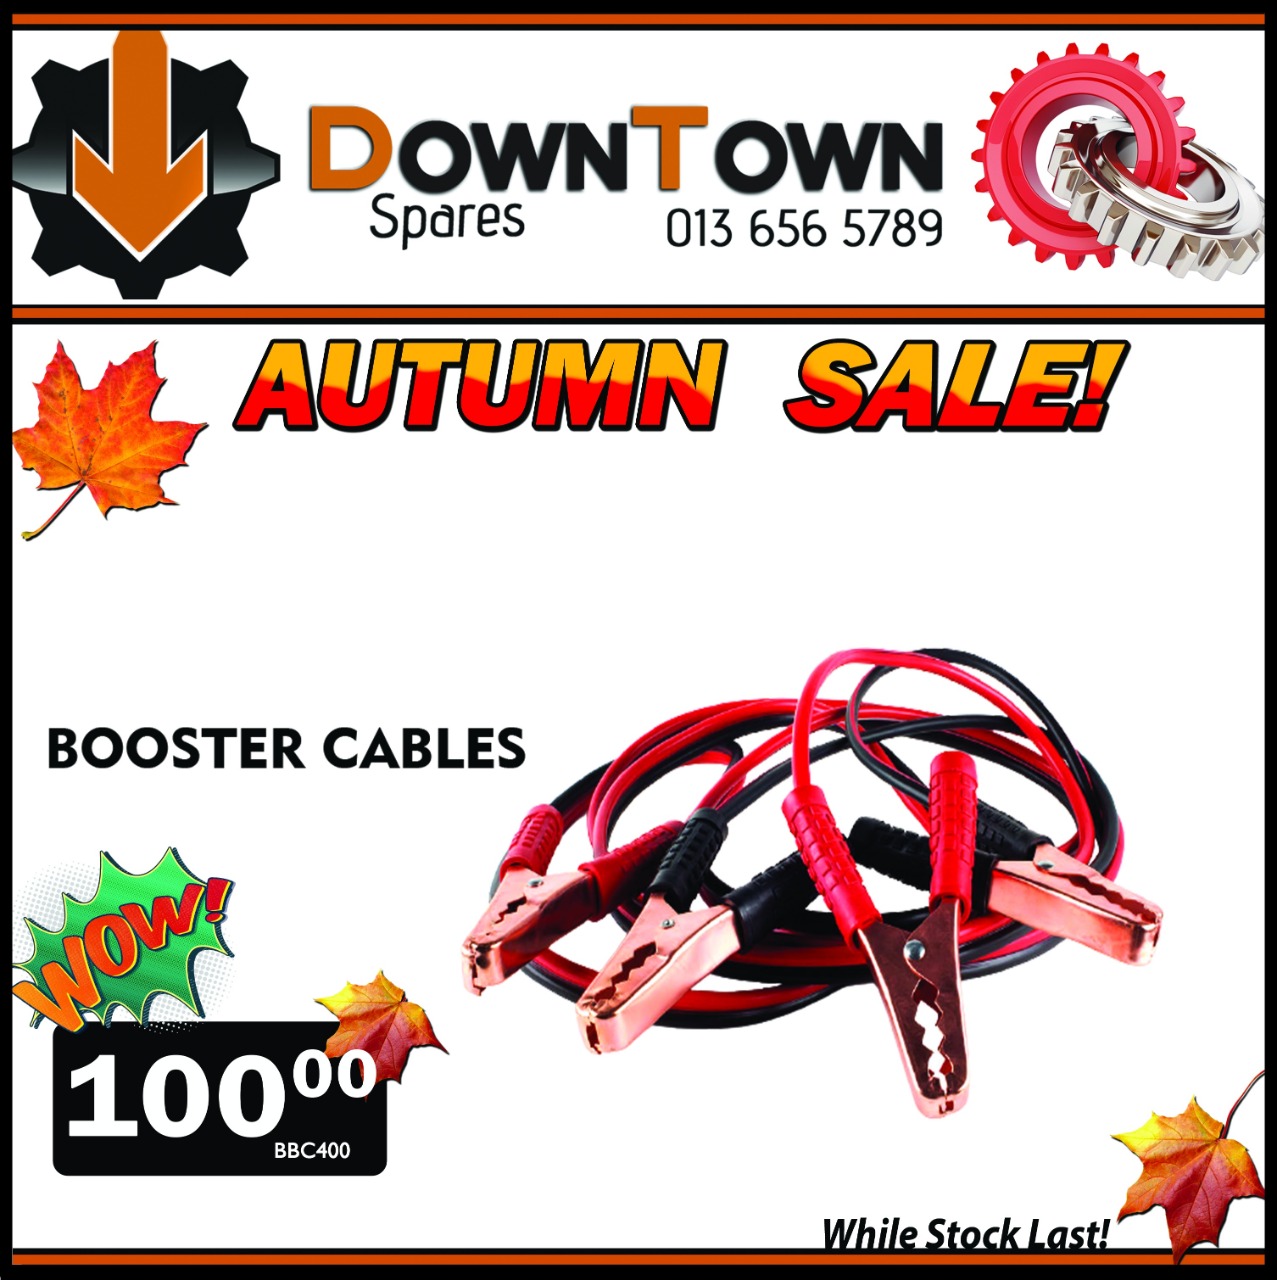 Booster Cables ONLY R100!